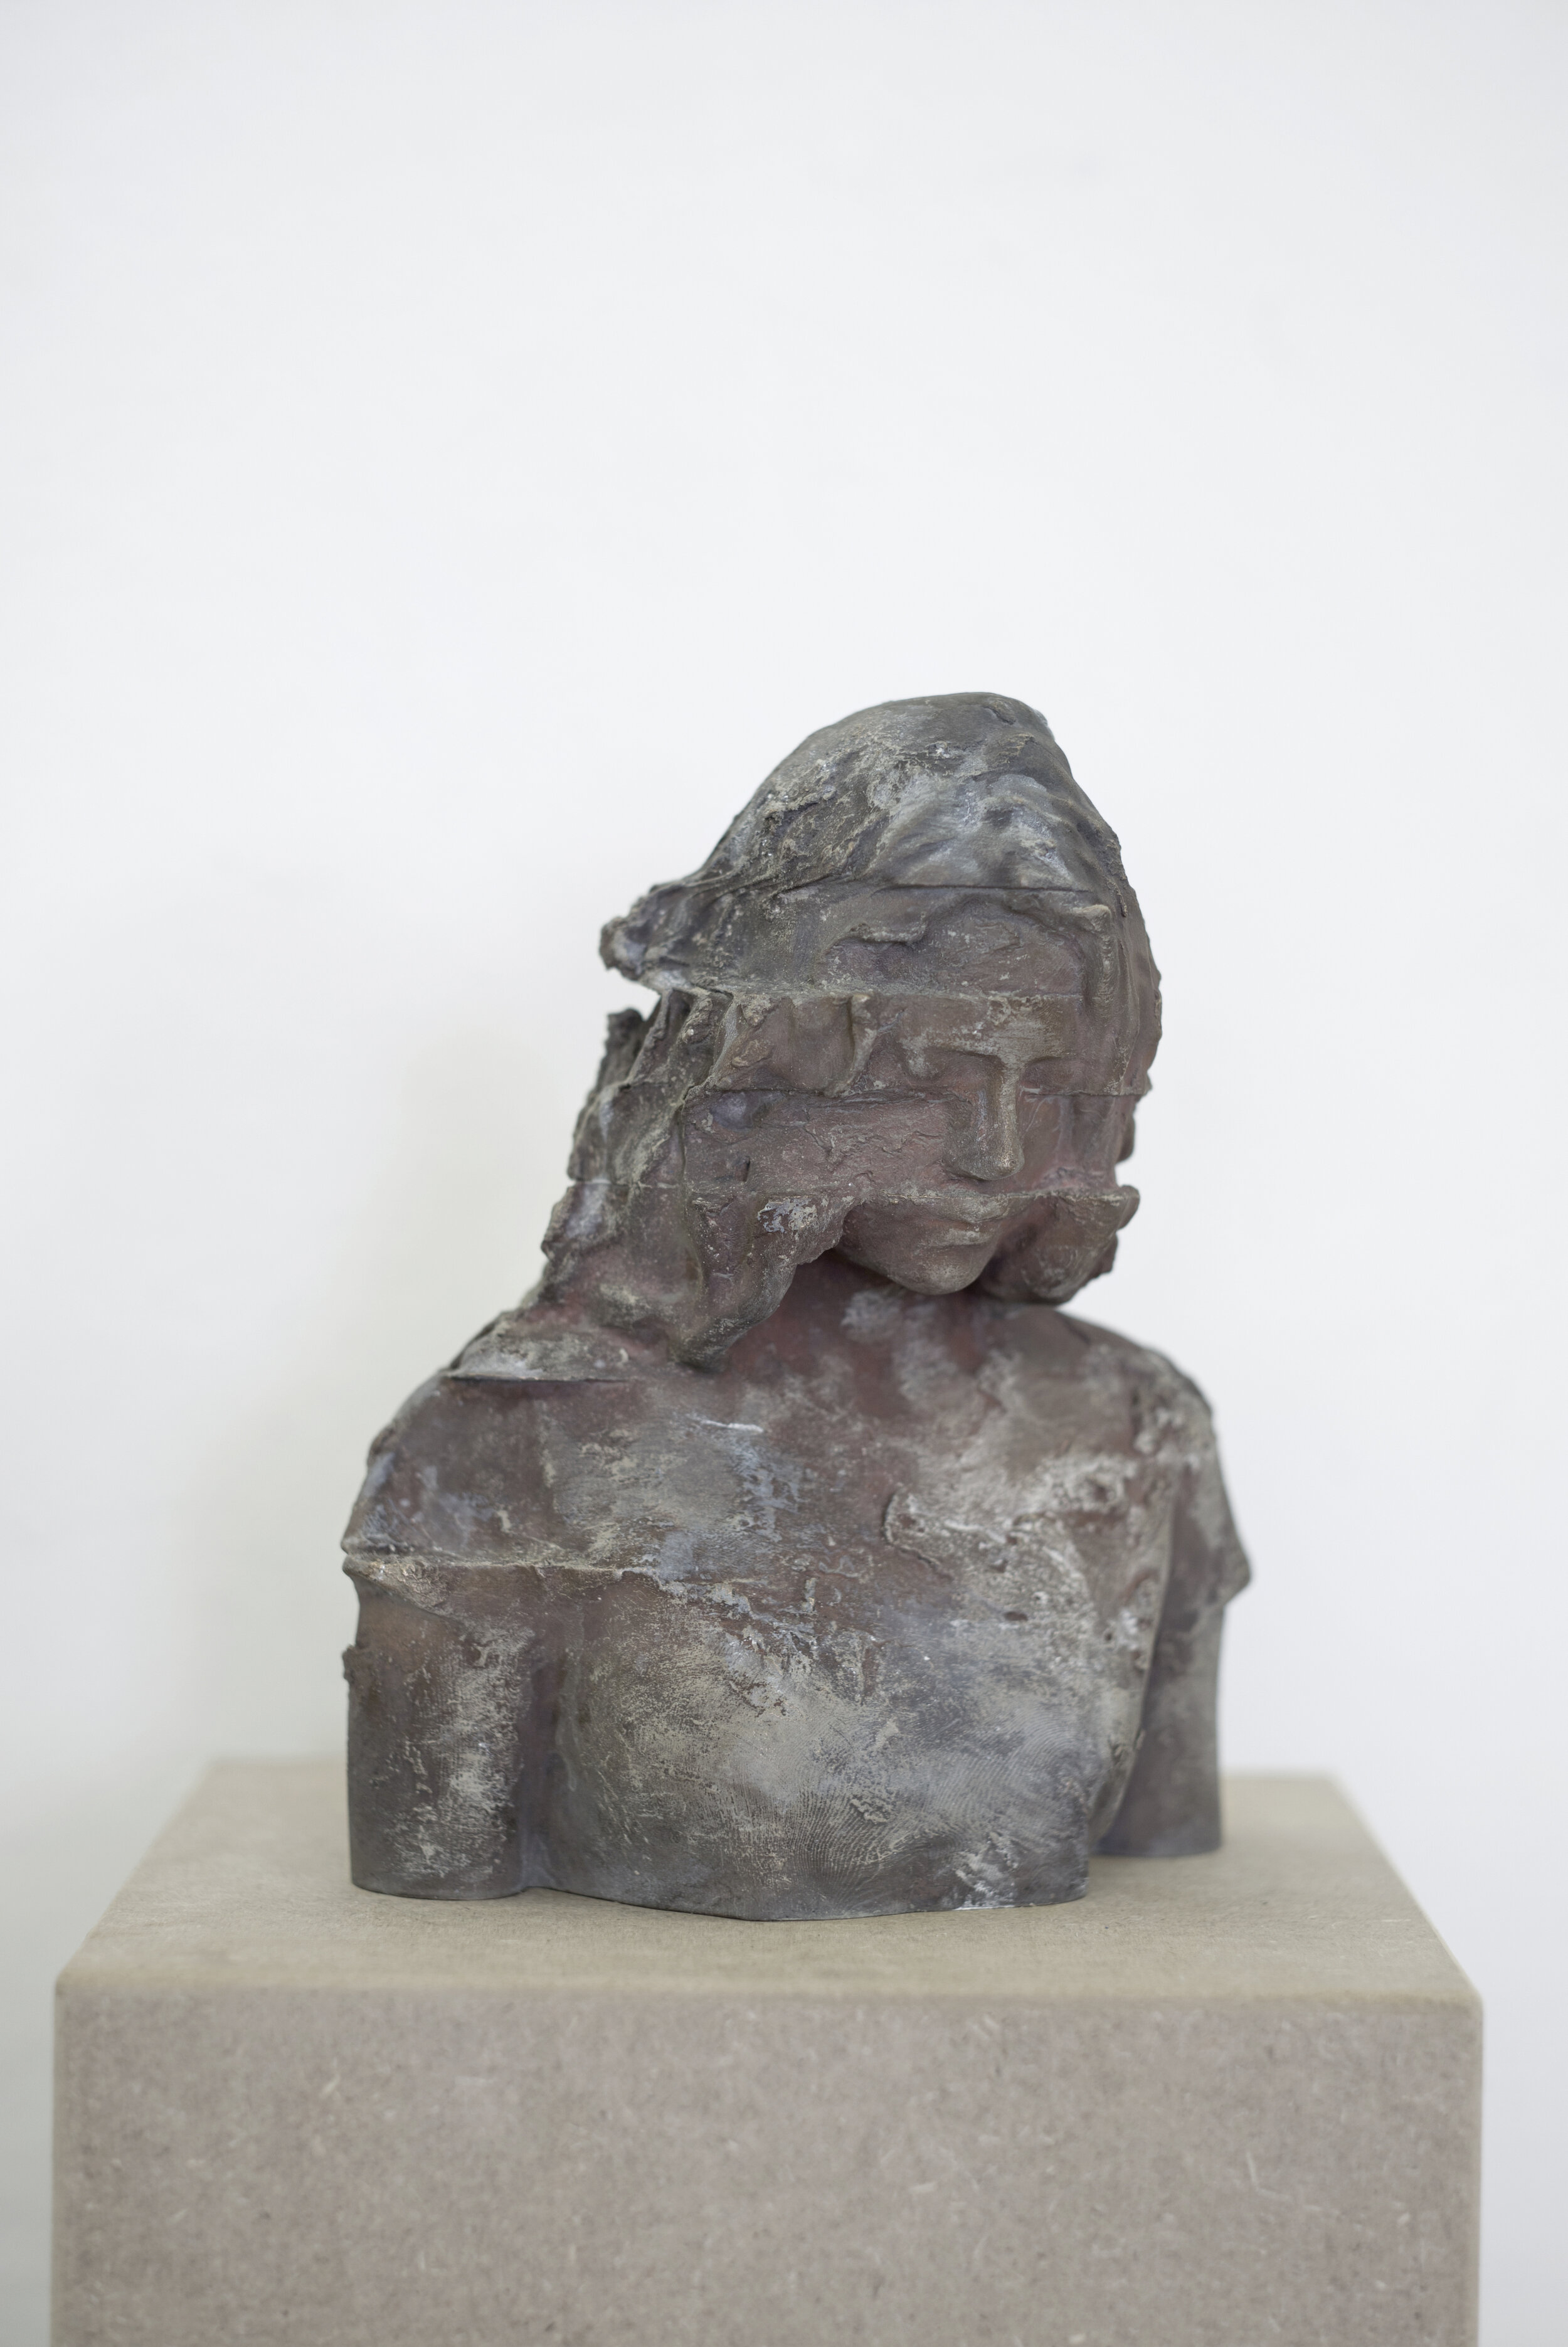   Bust II , 2015 Bronze Edition 1 of 6, 28 x 24 x 16 cm Private collection 